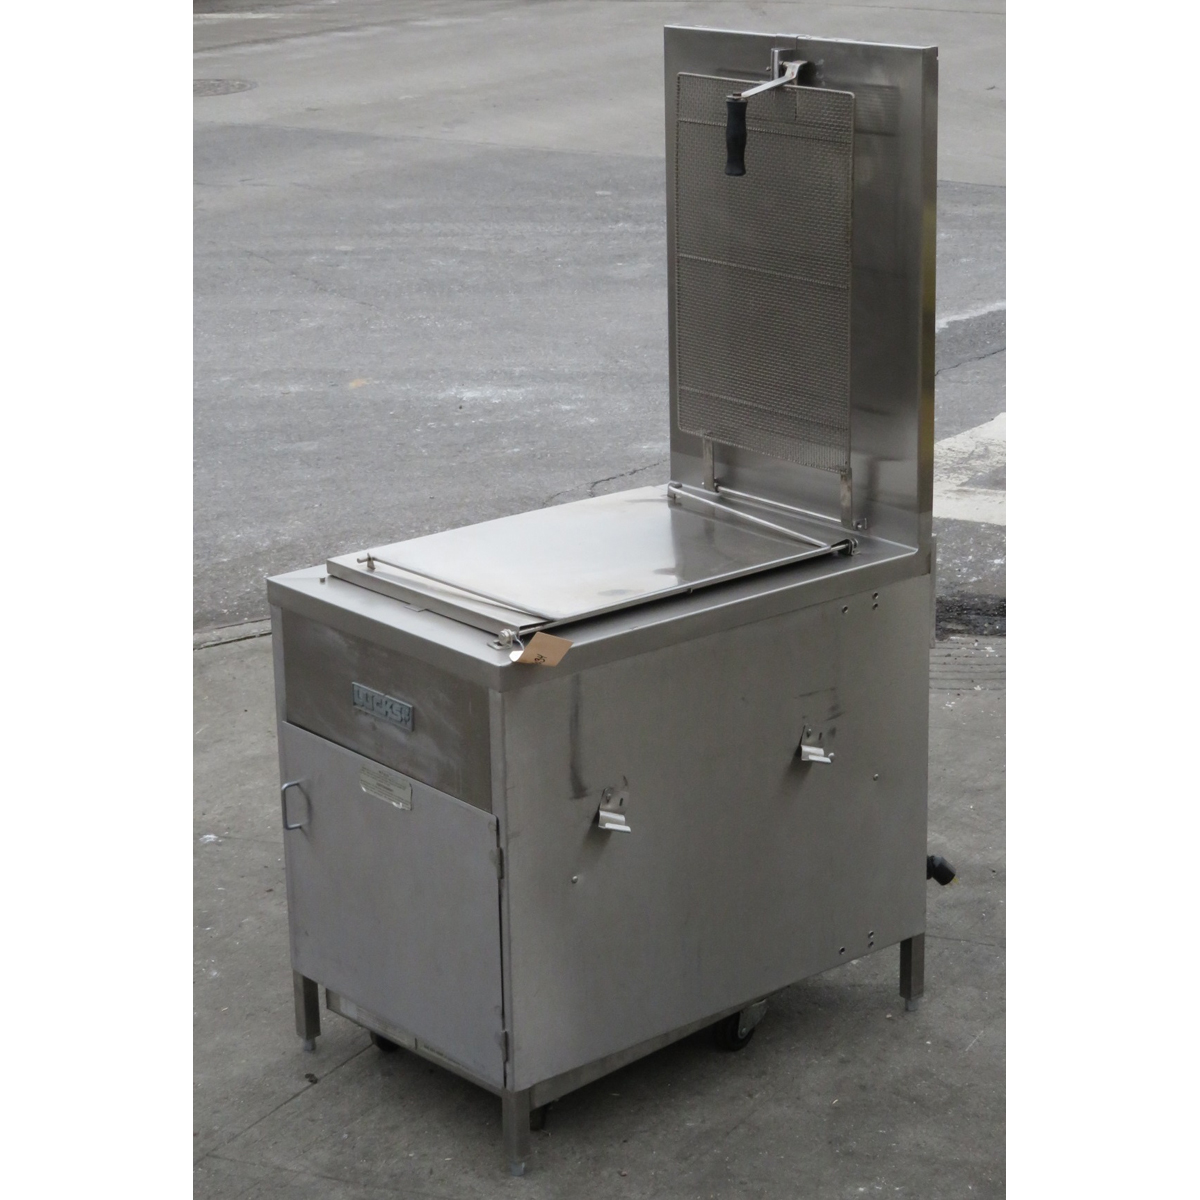 Lucks G1826 Gas Donut Fryer with Filtration System, Used Good Condition image 3